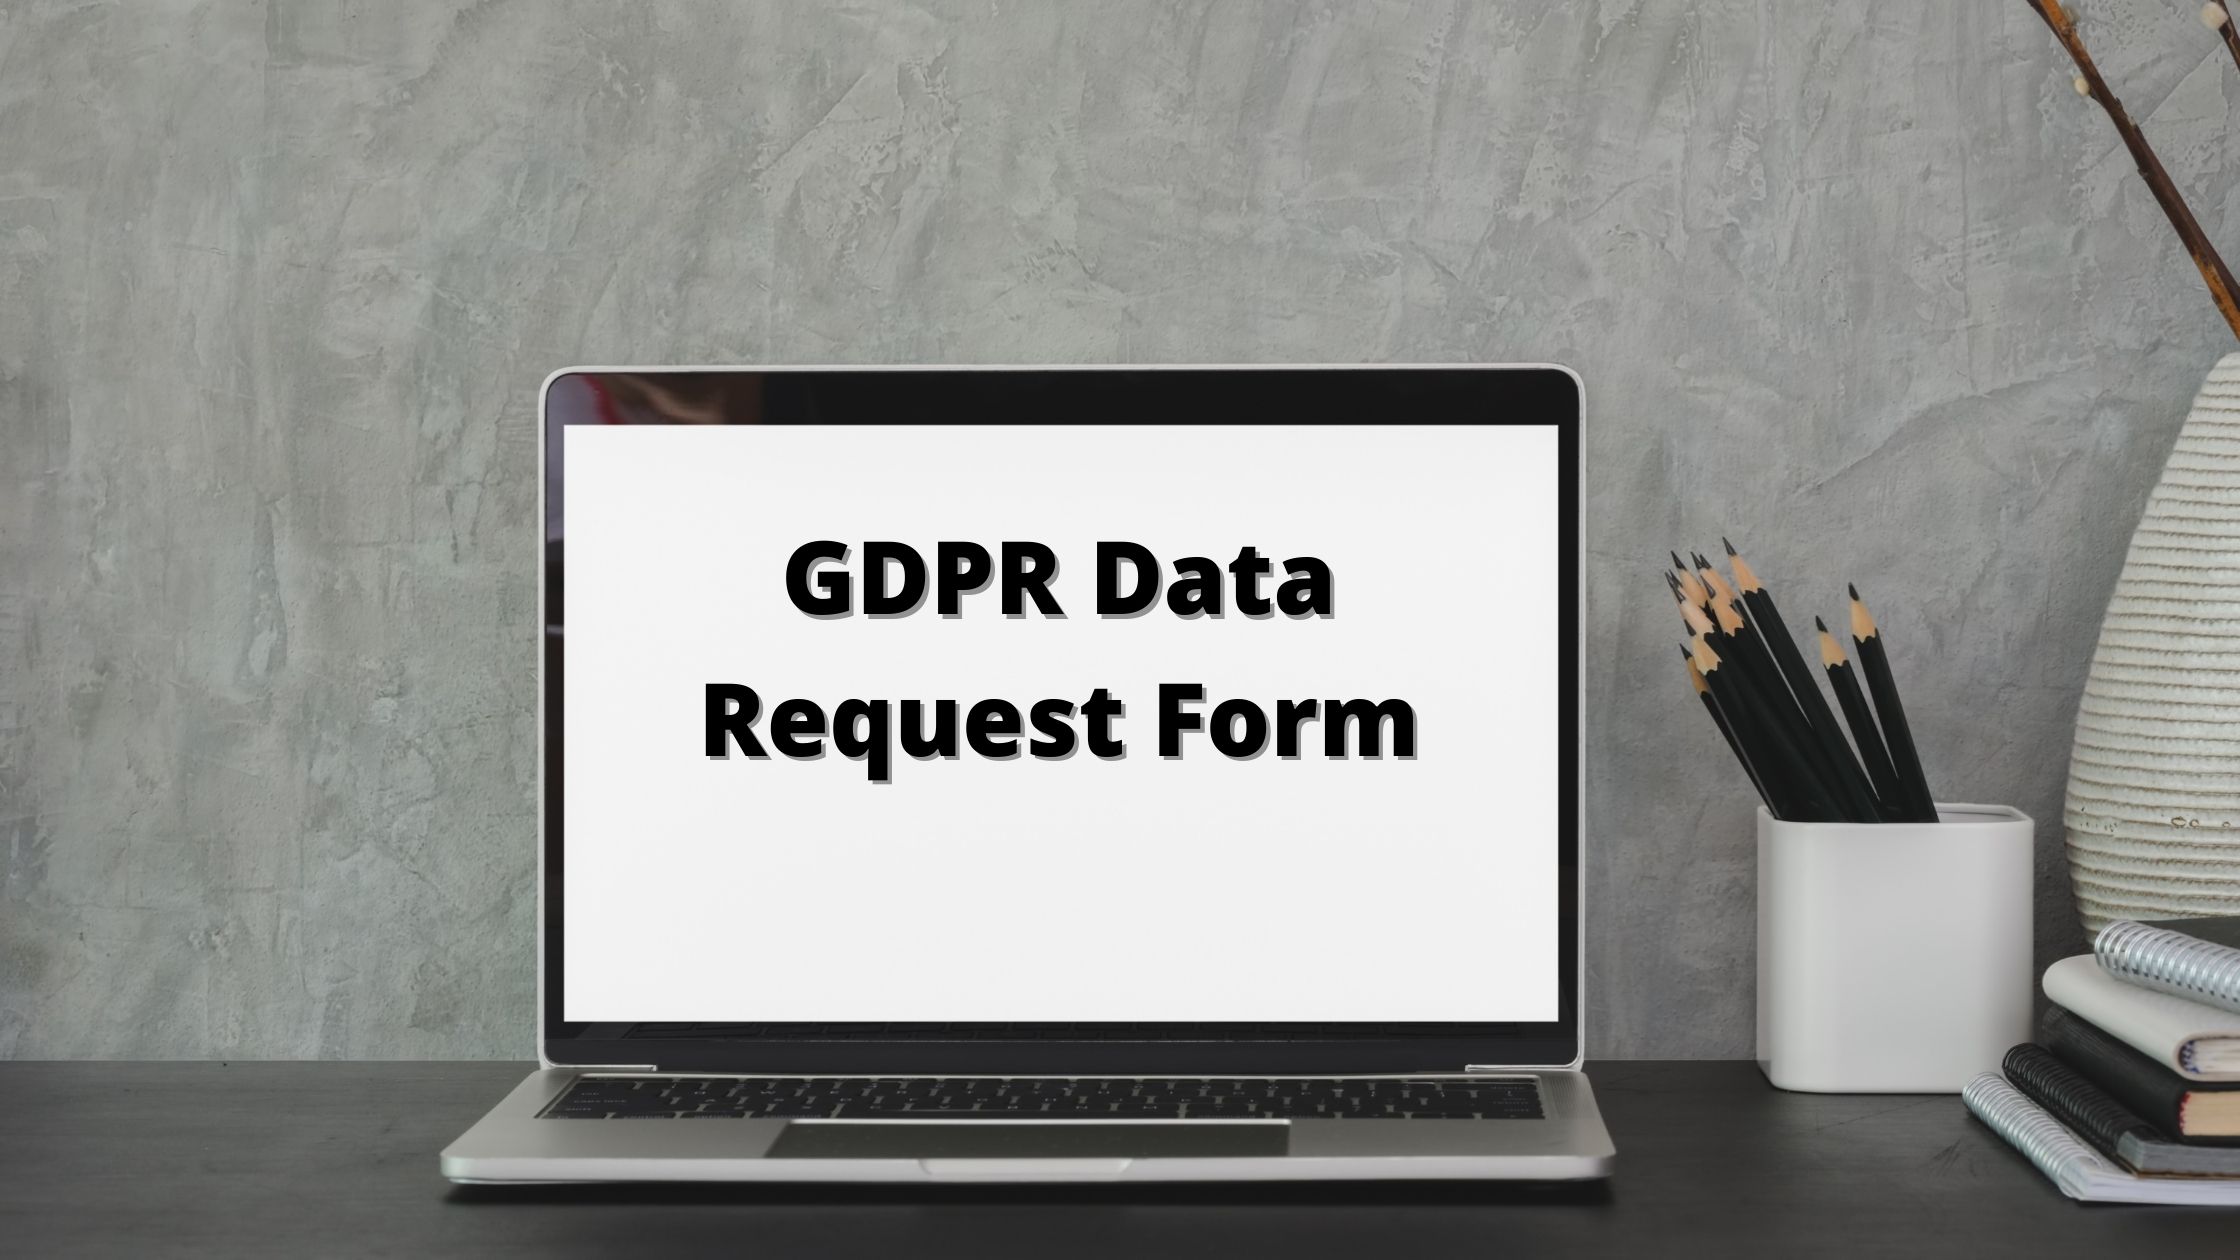 GDPR Data Request Form